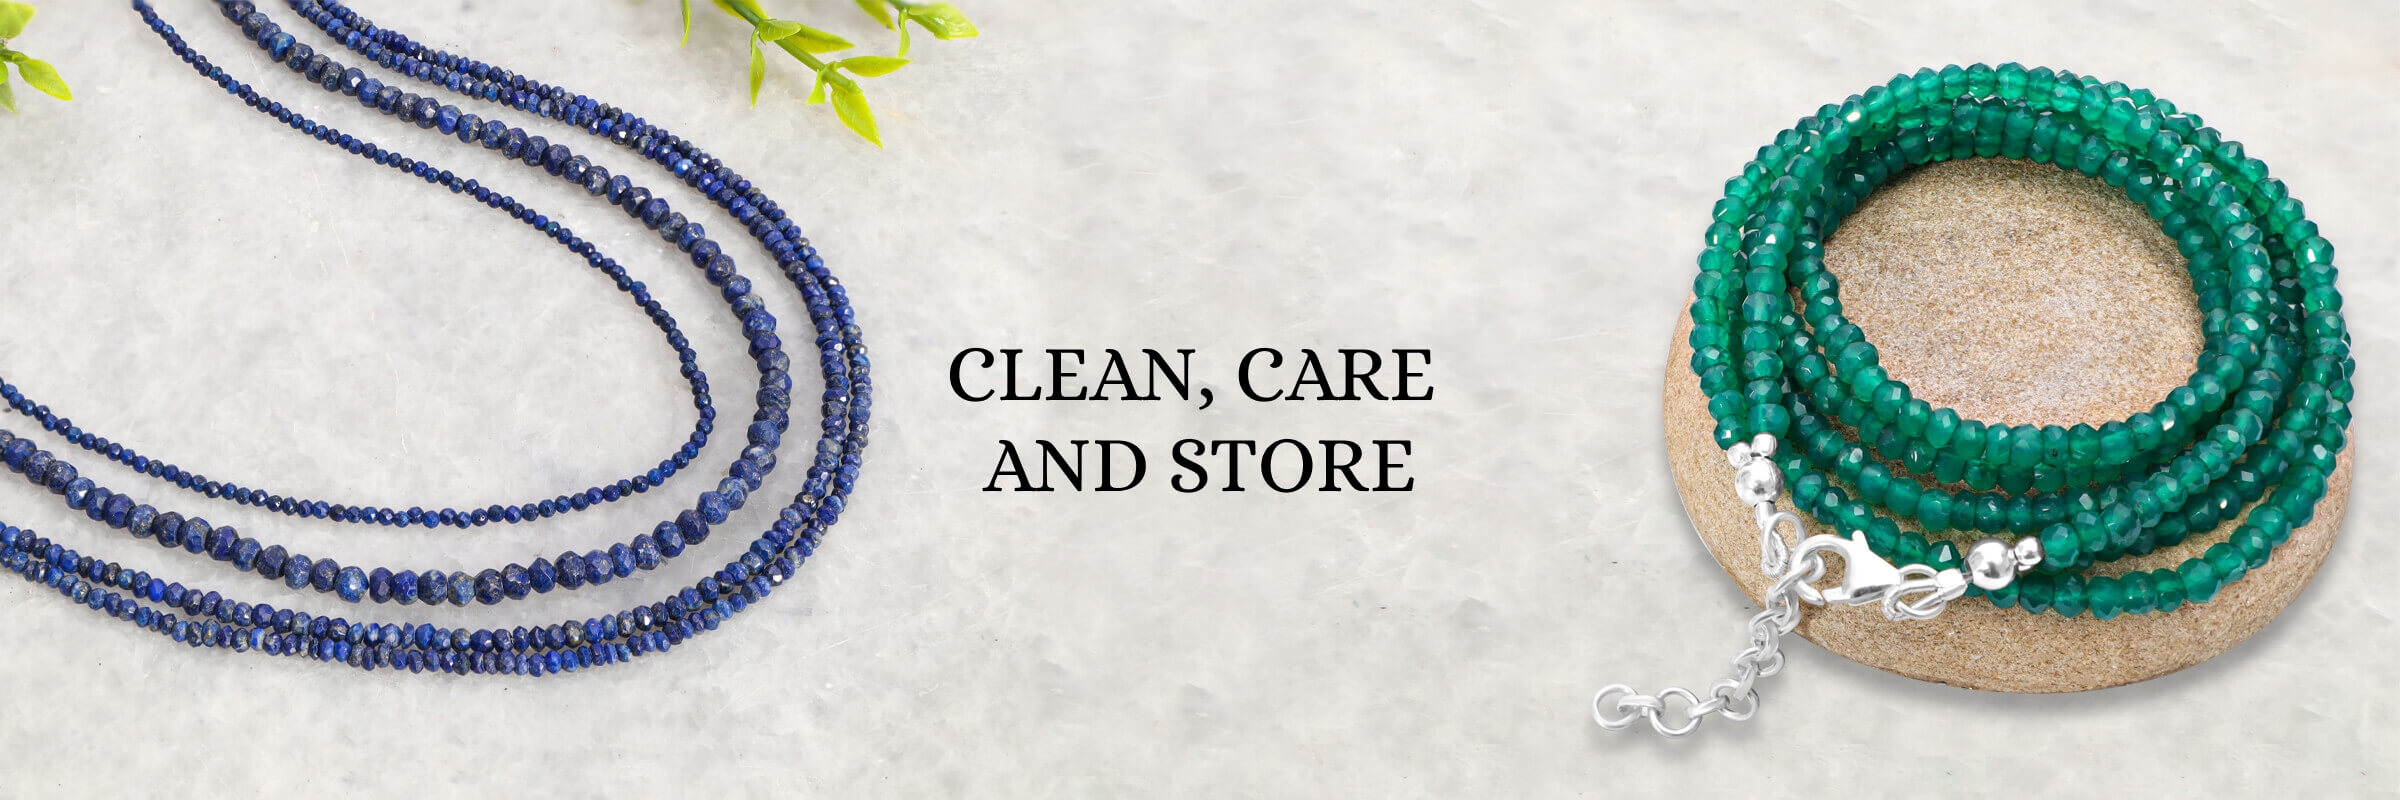 How To Take Care and Clean Gemstone Beads Jewelry